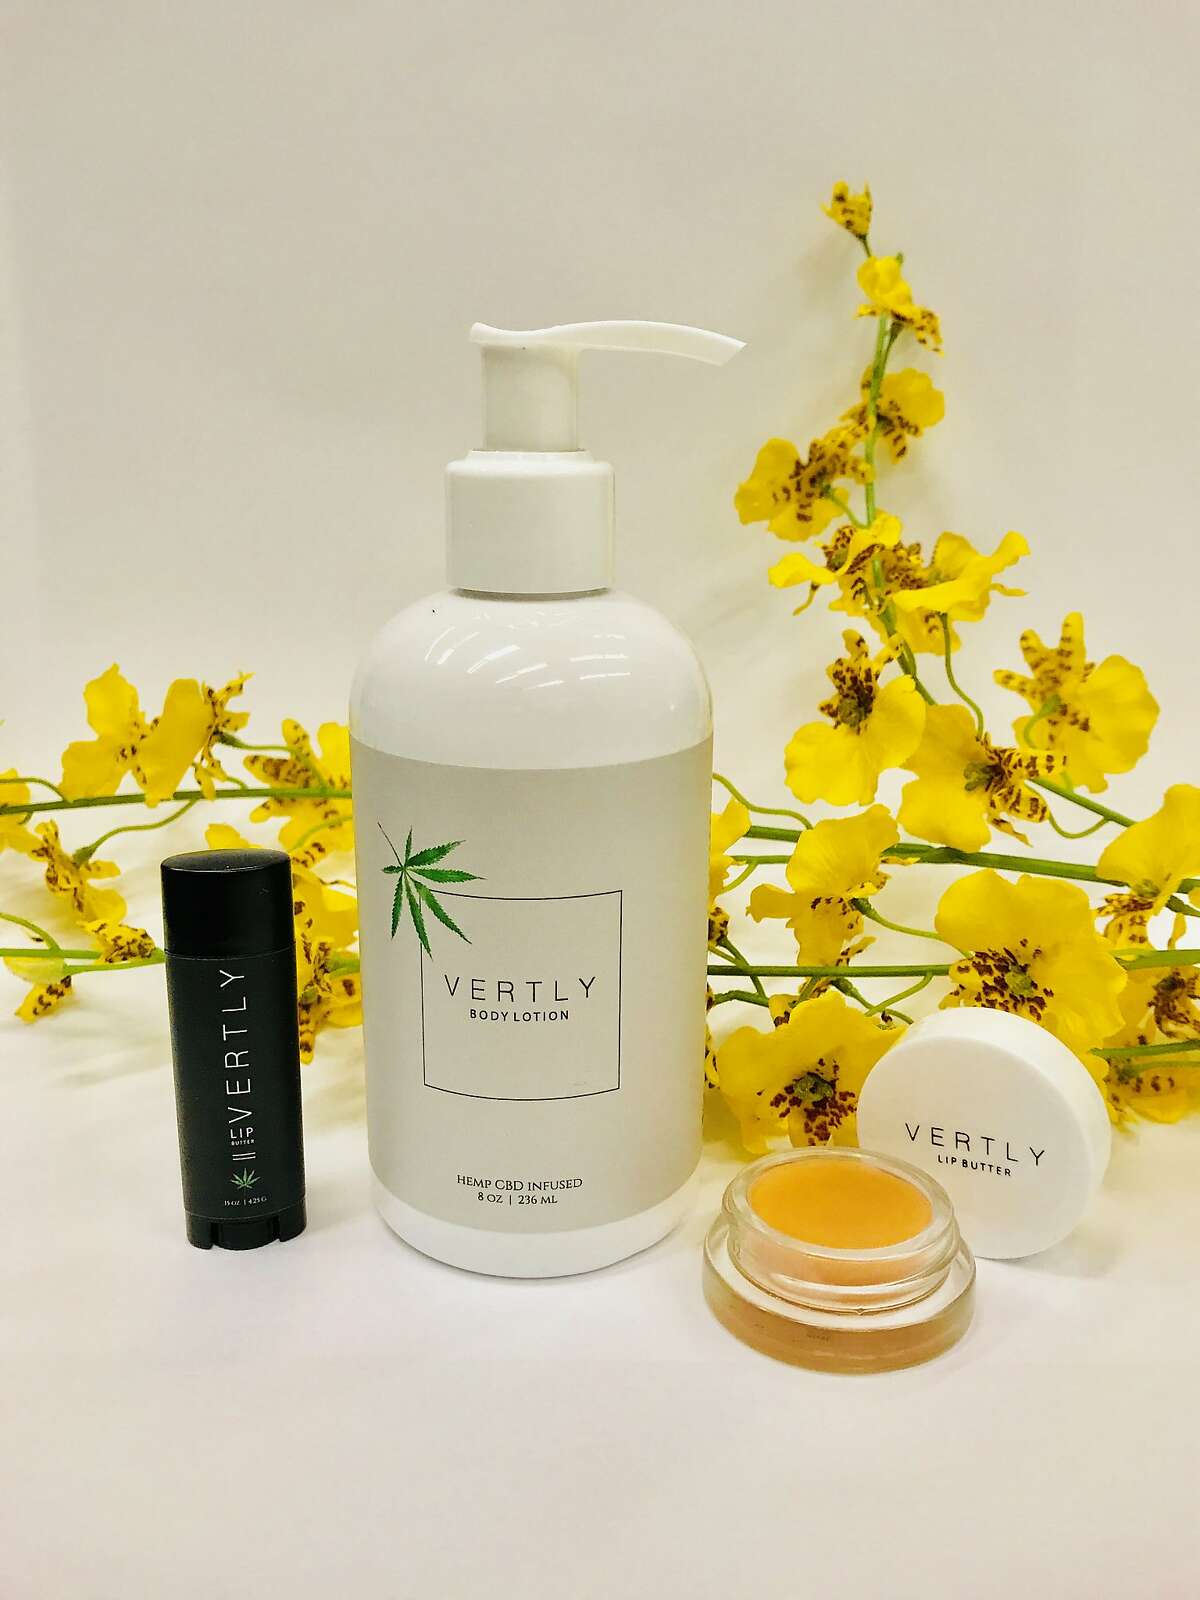 Claudia Mata and Zander Gladish launched Vertly, a plant-based lip balm� line in August 2017 with cannabis as an ingredient, and have added a lotion infused with CBD to the line. It debuts in February. Standard balms come in white packaging and are infused with sativa oil derived from the hemp seed, , while products in white packaging contain CBD, or cannabidiol, a hemp molecule with fatty acids and vitamins.� The rose-scented (and rose-colored)� jar of CBD lip balm retails for $22, at Hero Shop boutique on in San Francisco and www.vertlybalm.com. The black lip balm sells for two in a package for $26, at Barbary Coast dispensary, San Francisco. A new CBD massage oil (center) will be available in February at www.vertlybalm.com.